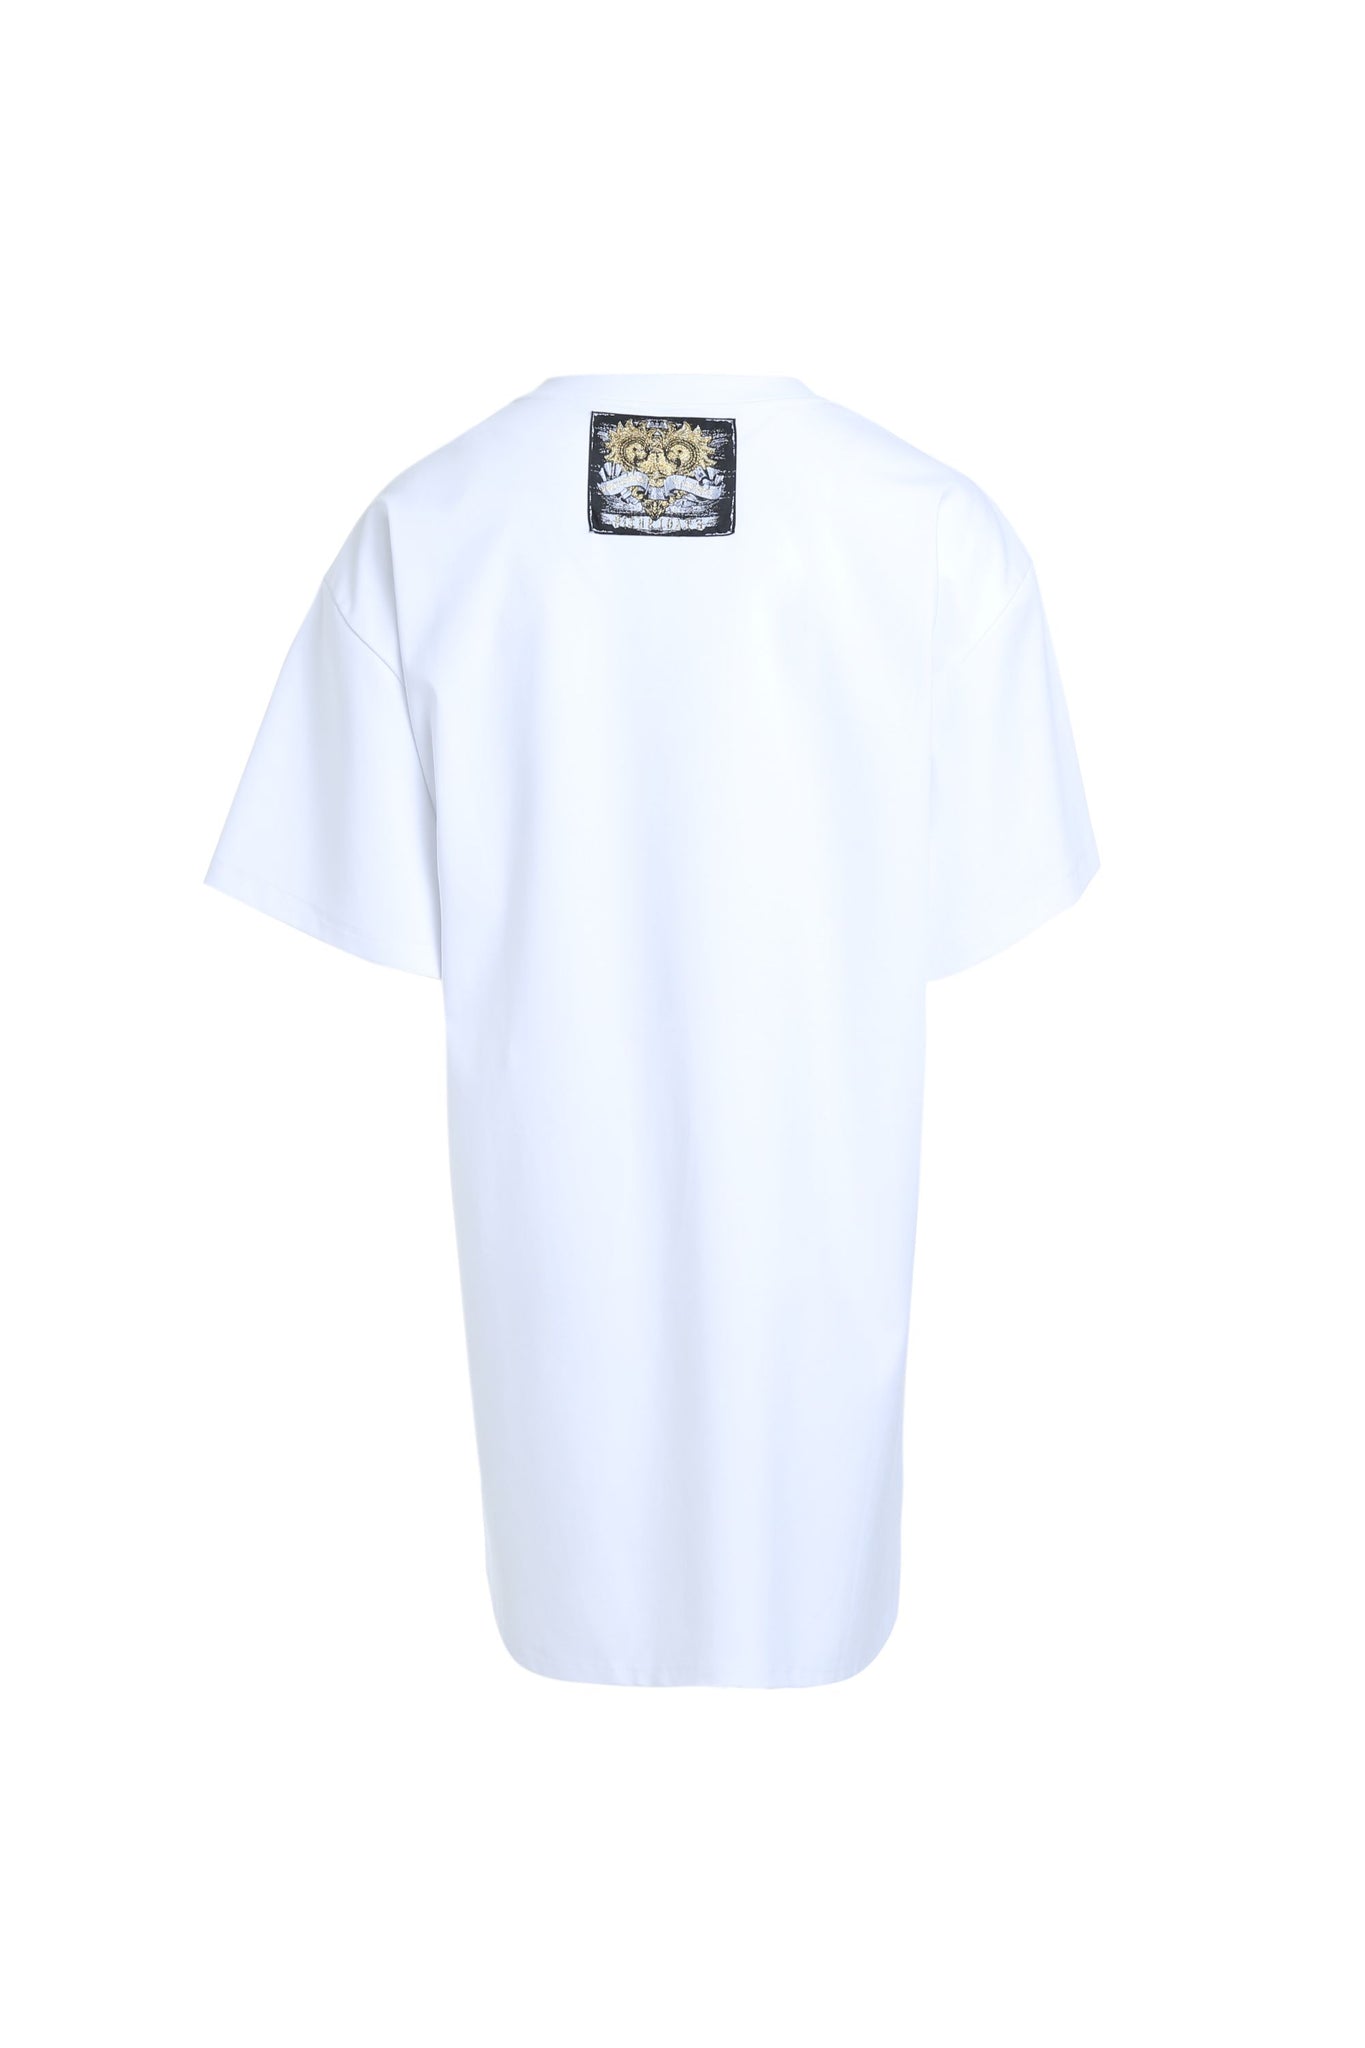 White Industrial Graphic T-Shirt